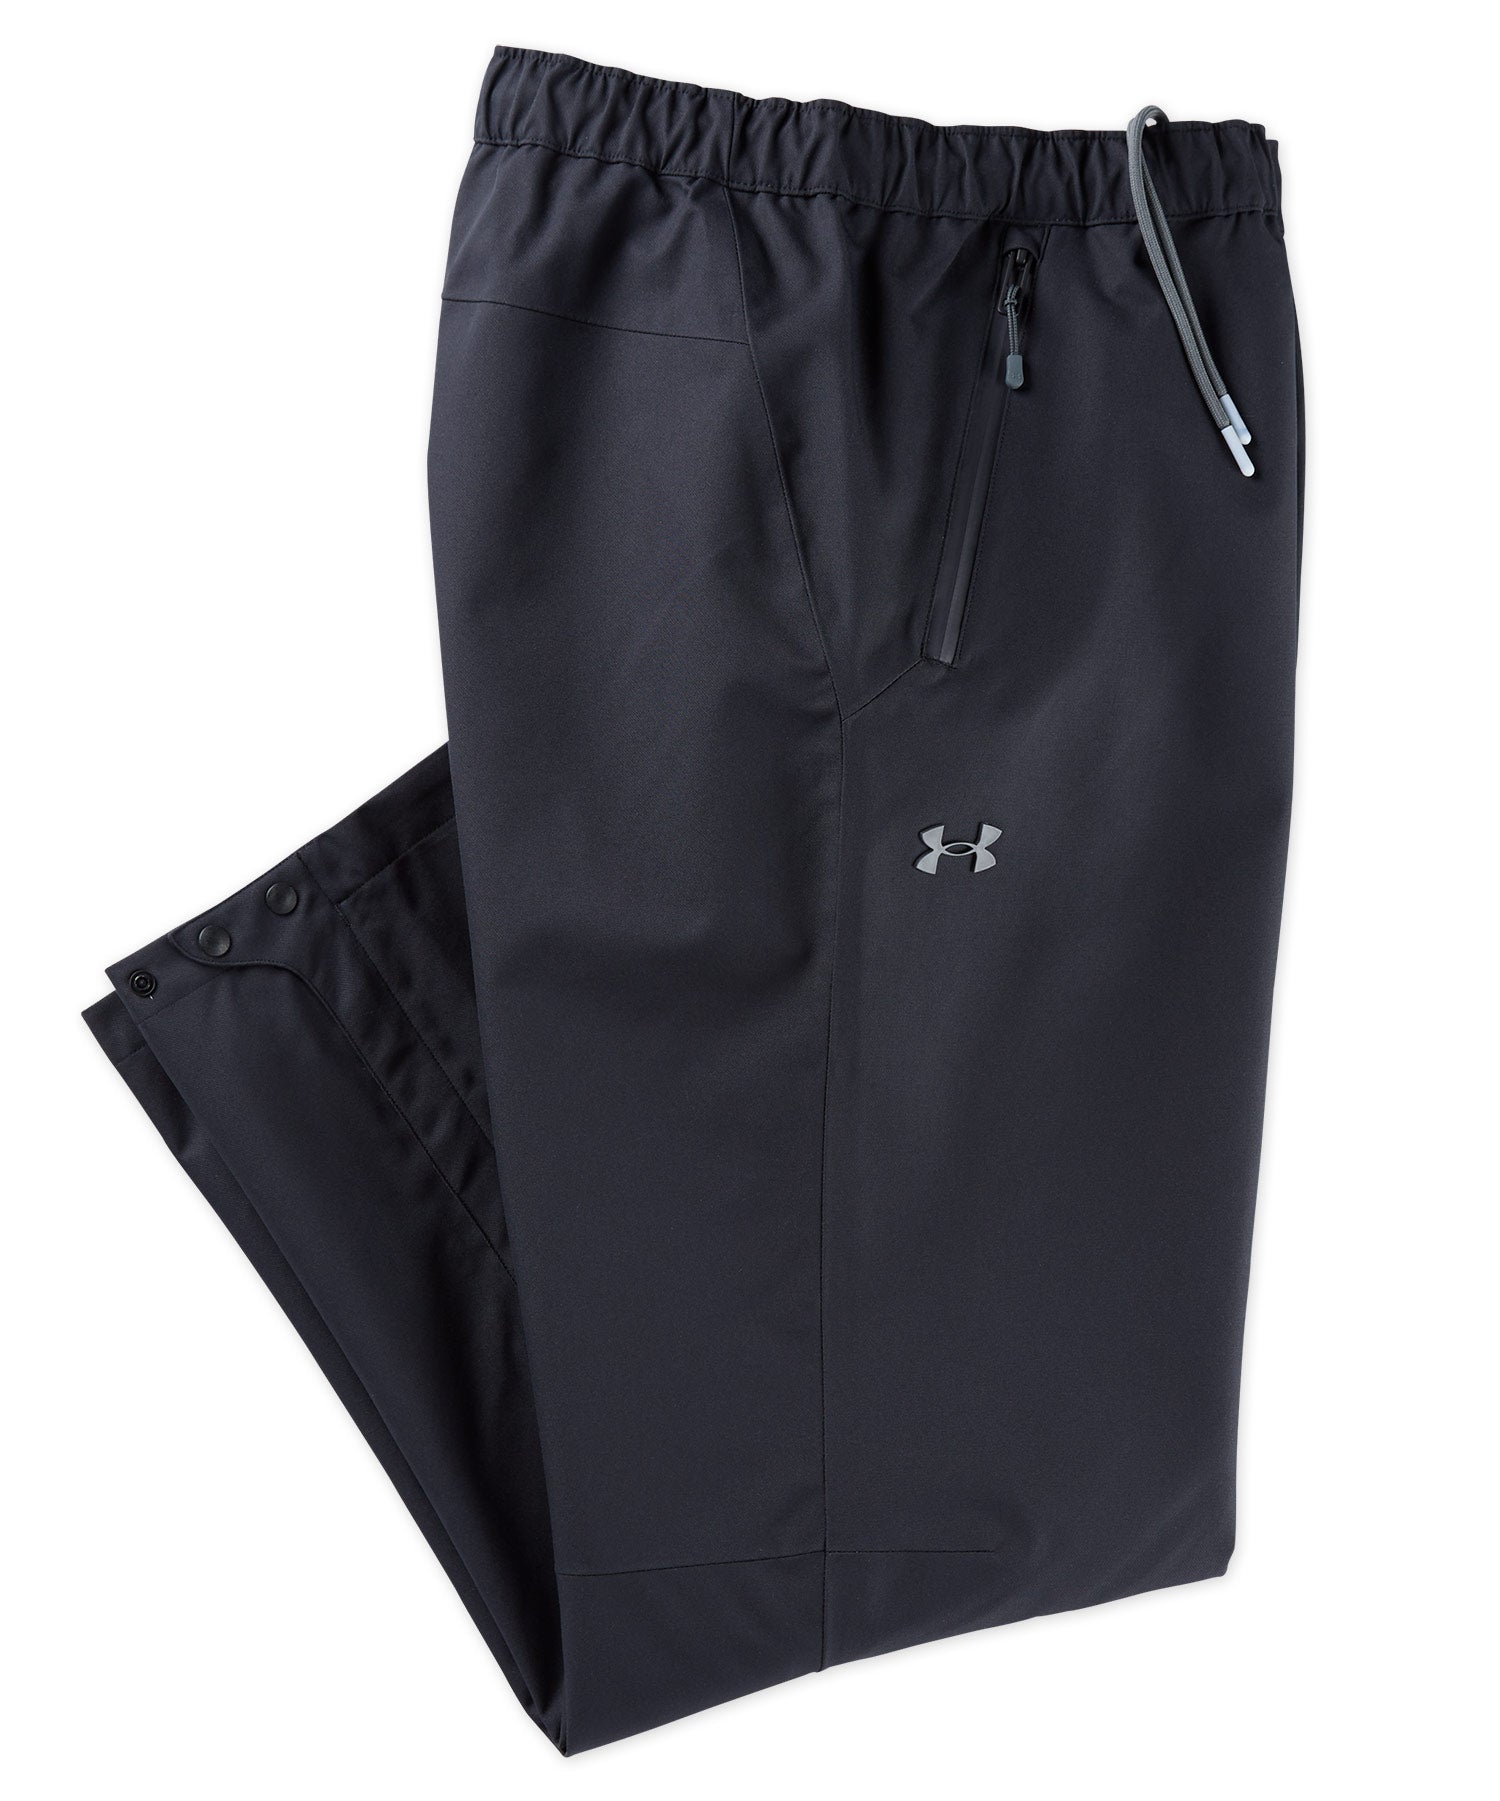 Under Armour Lined Pants - Westport Big & Tall